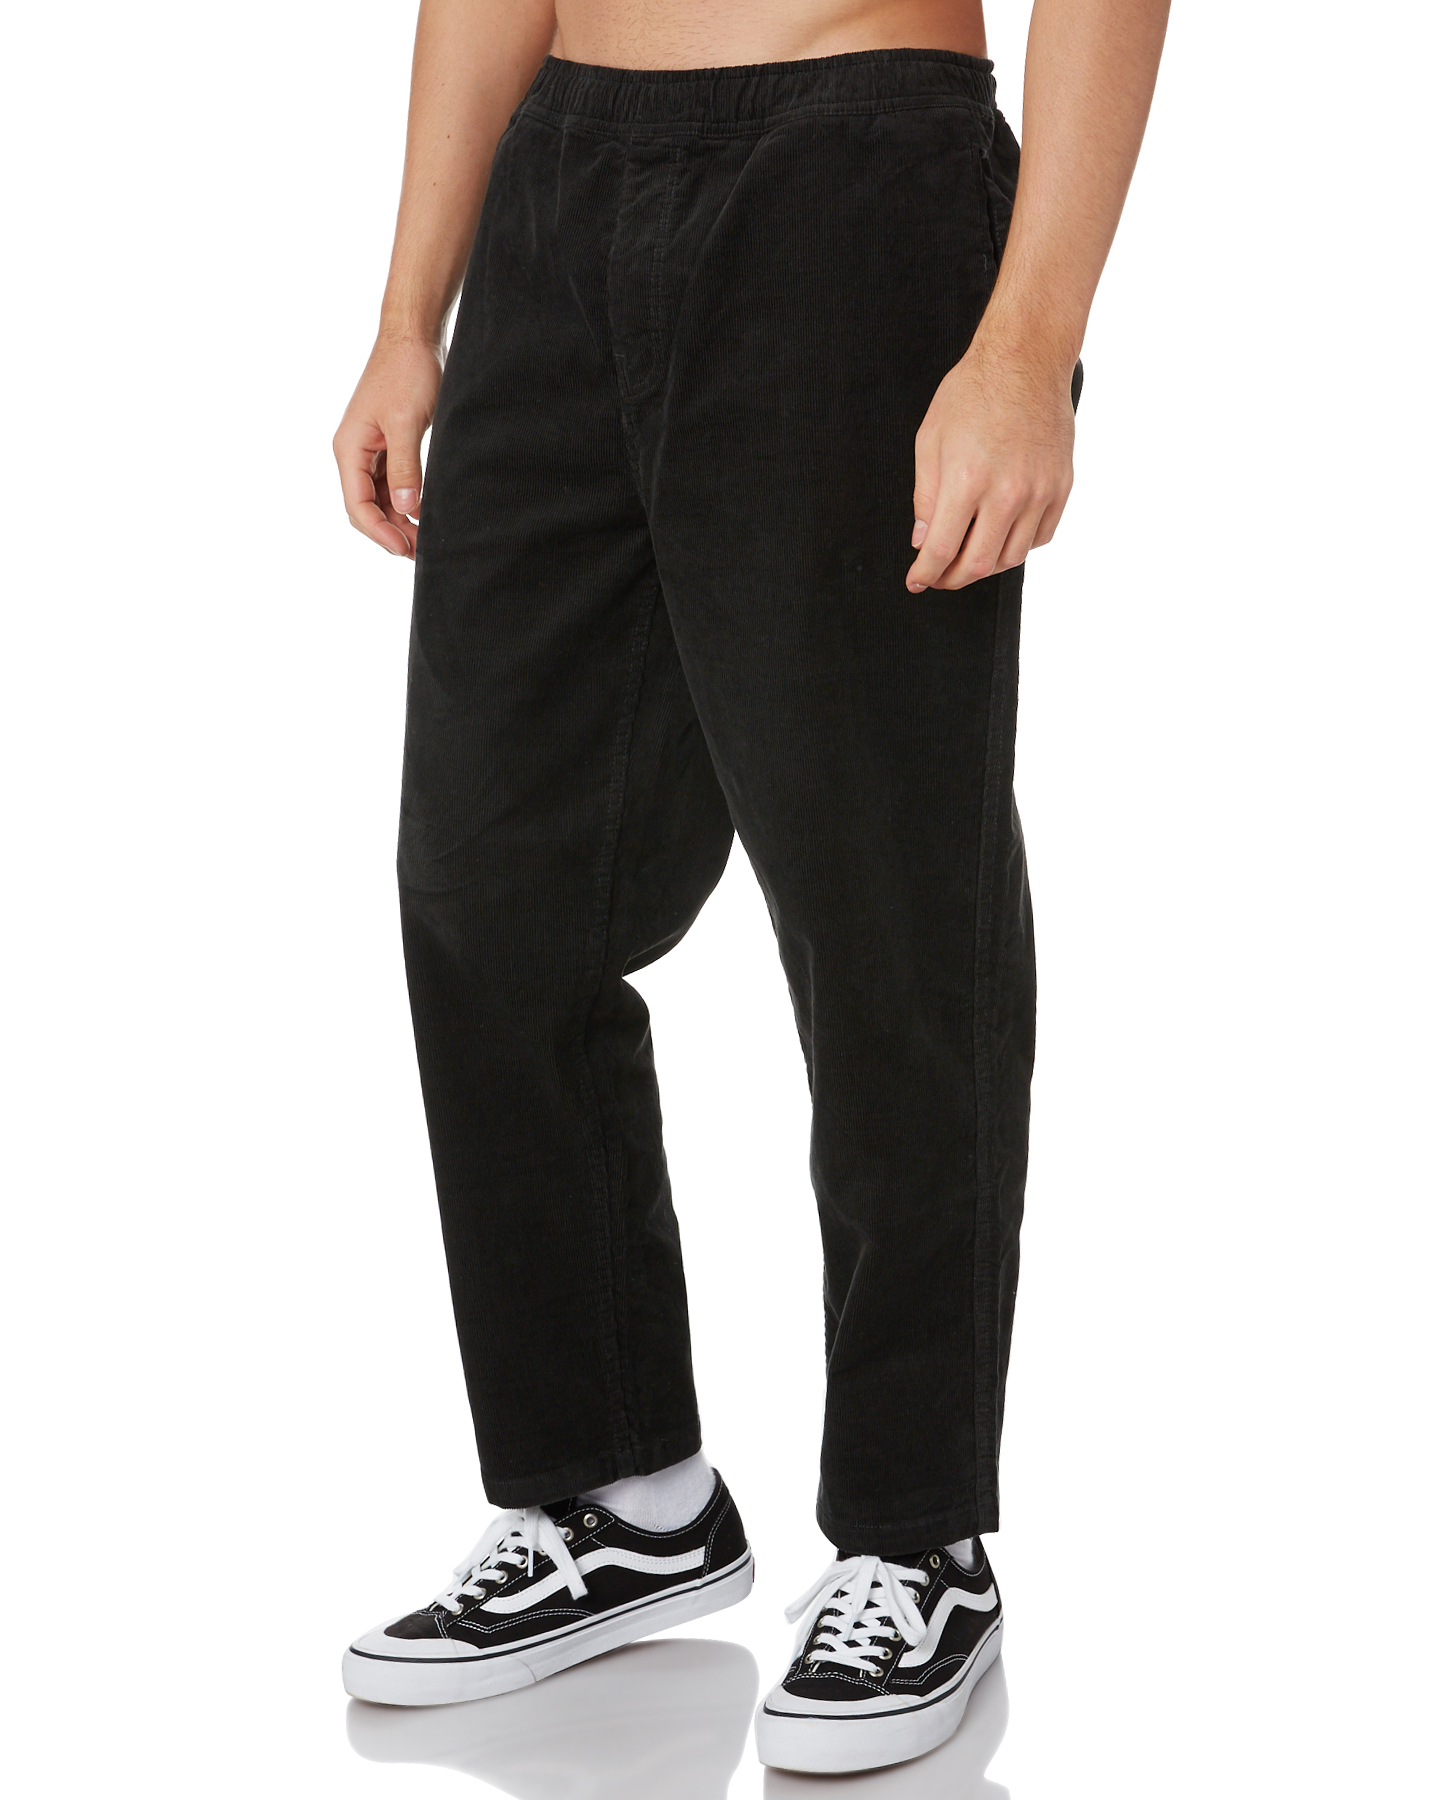 Brixton Steady Taper Elastic Mens Pant - Washed Black | SurfStitch